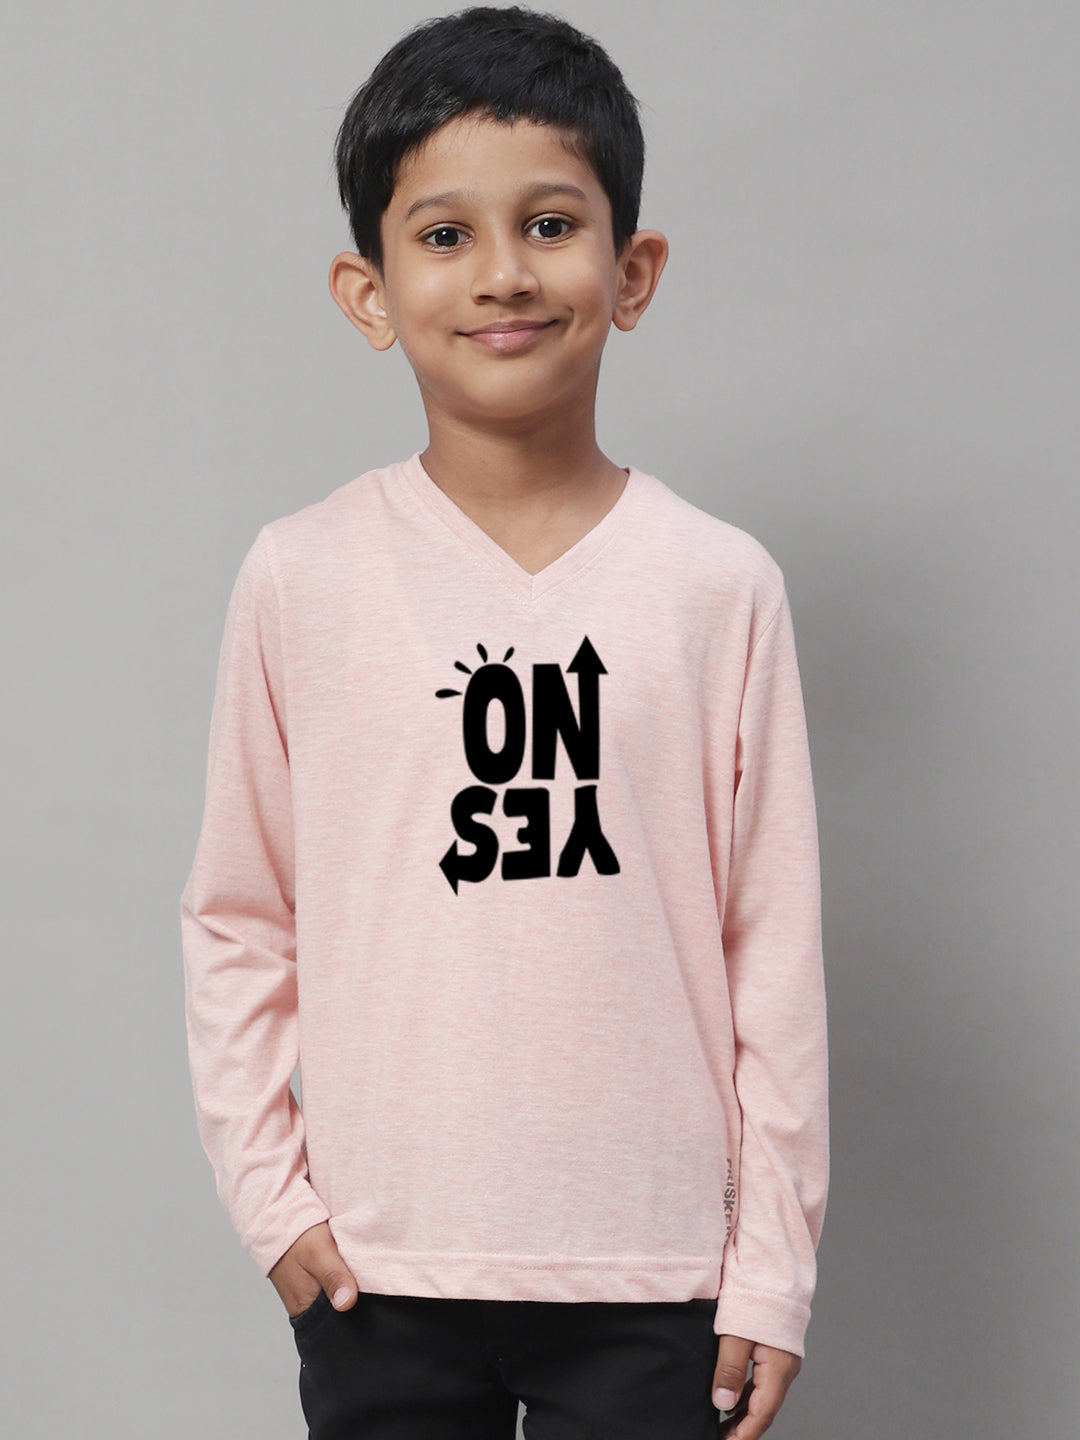 Boys No Yes Casual Fit Printed T-Shirt - Friskers